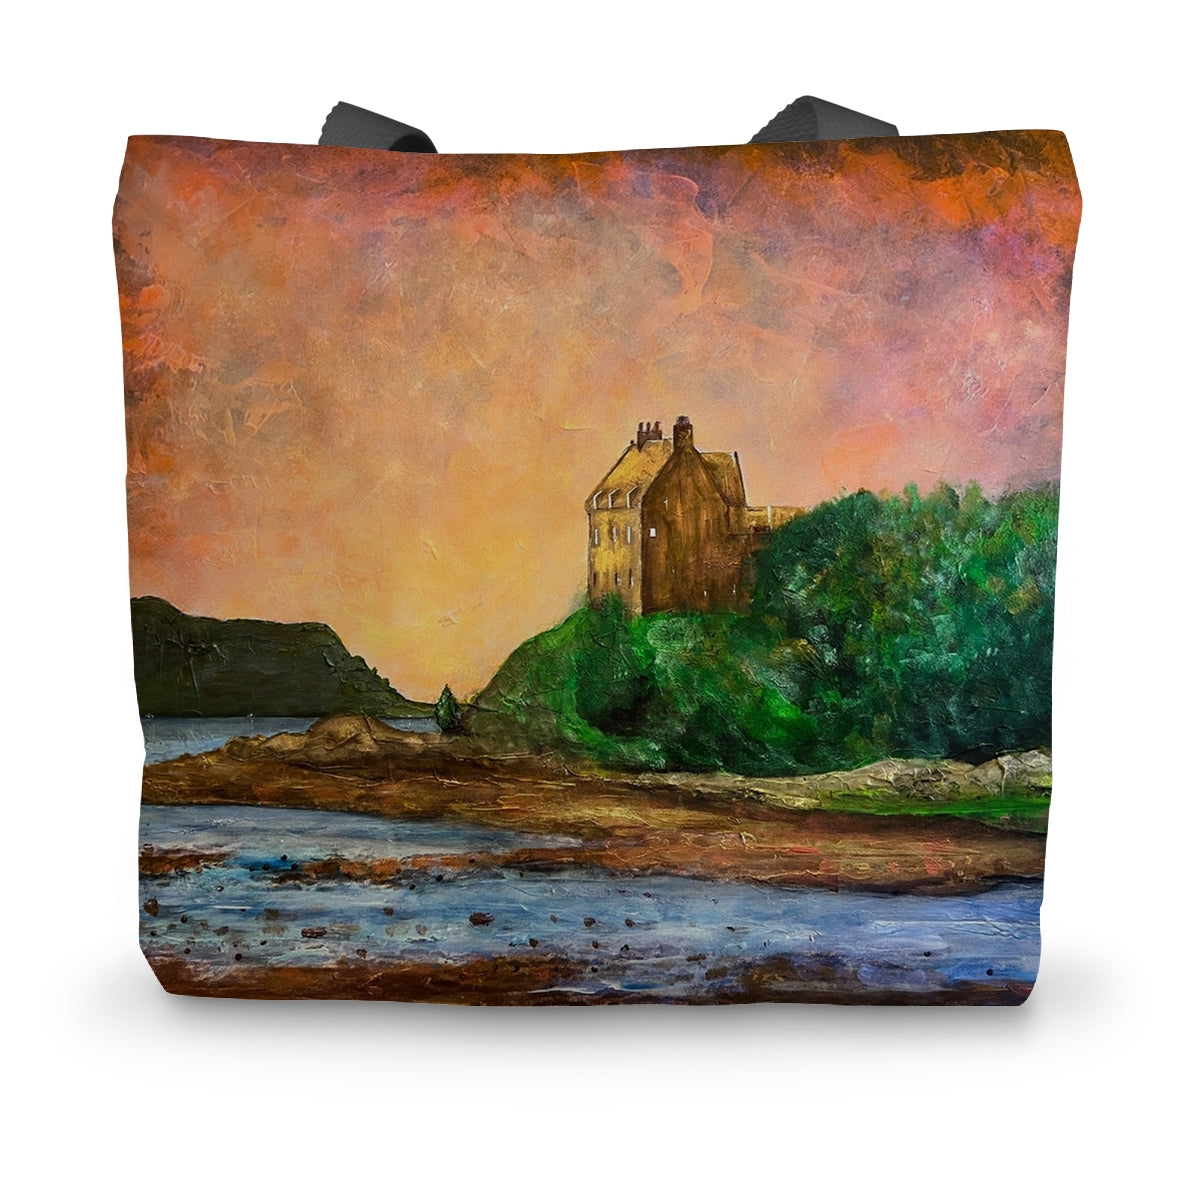 Duntrune Castle Art Gifts Canvas Tote Bag-Bags-Historic & Iconic Scotland Art Gallery-14"x18.5"-Paintings, Prints, Homeware, Art Gifts From Scotland By Scottish Artist Kevin Hunter